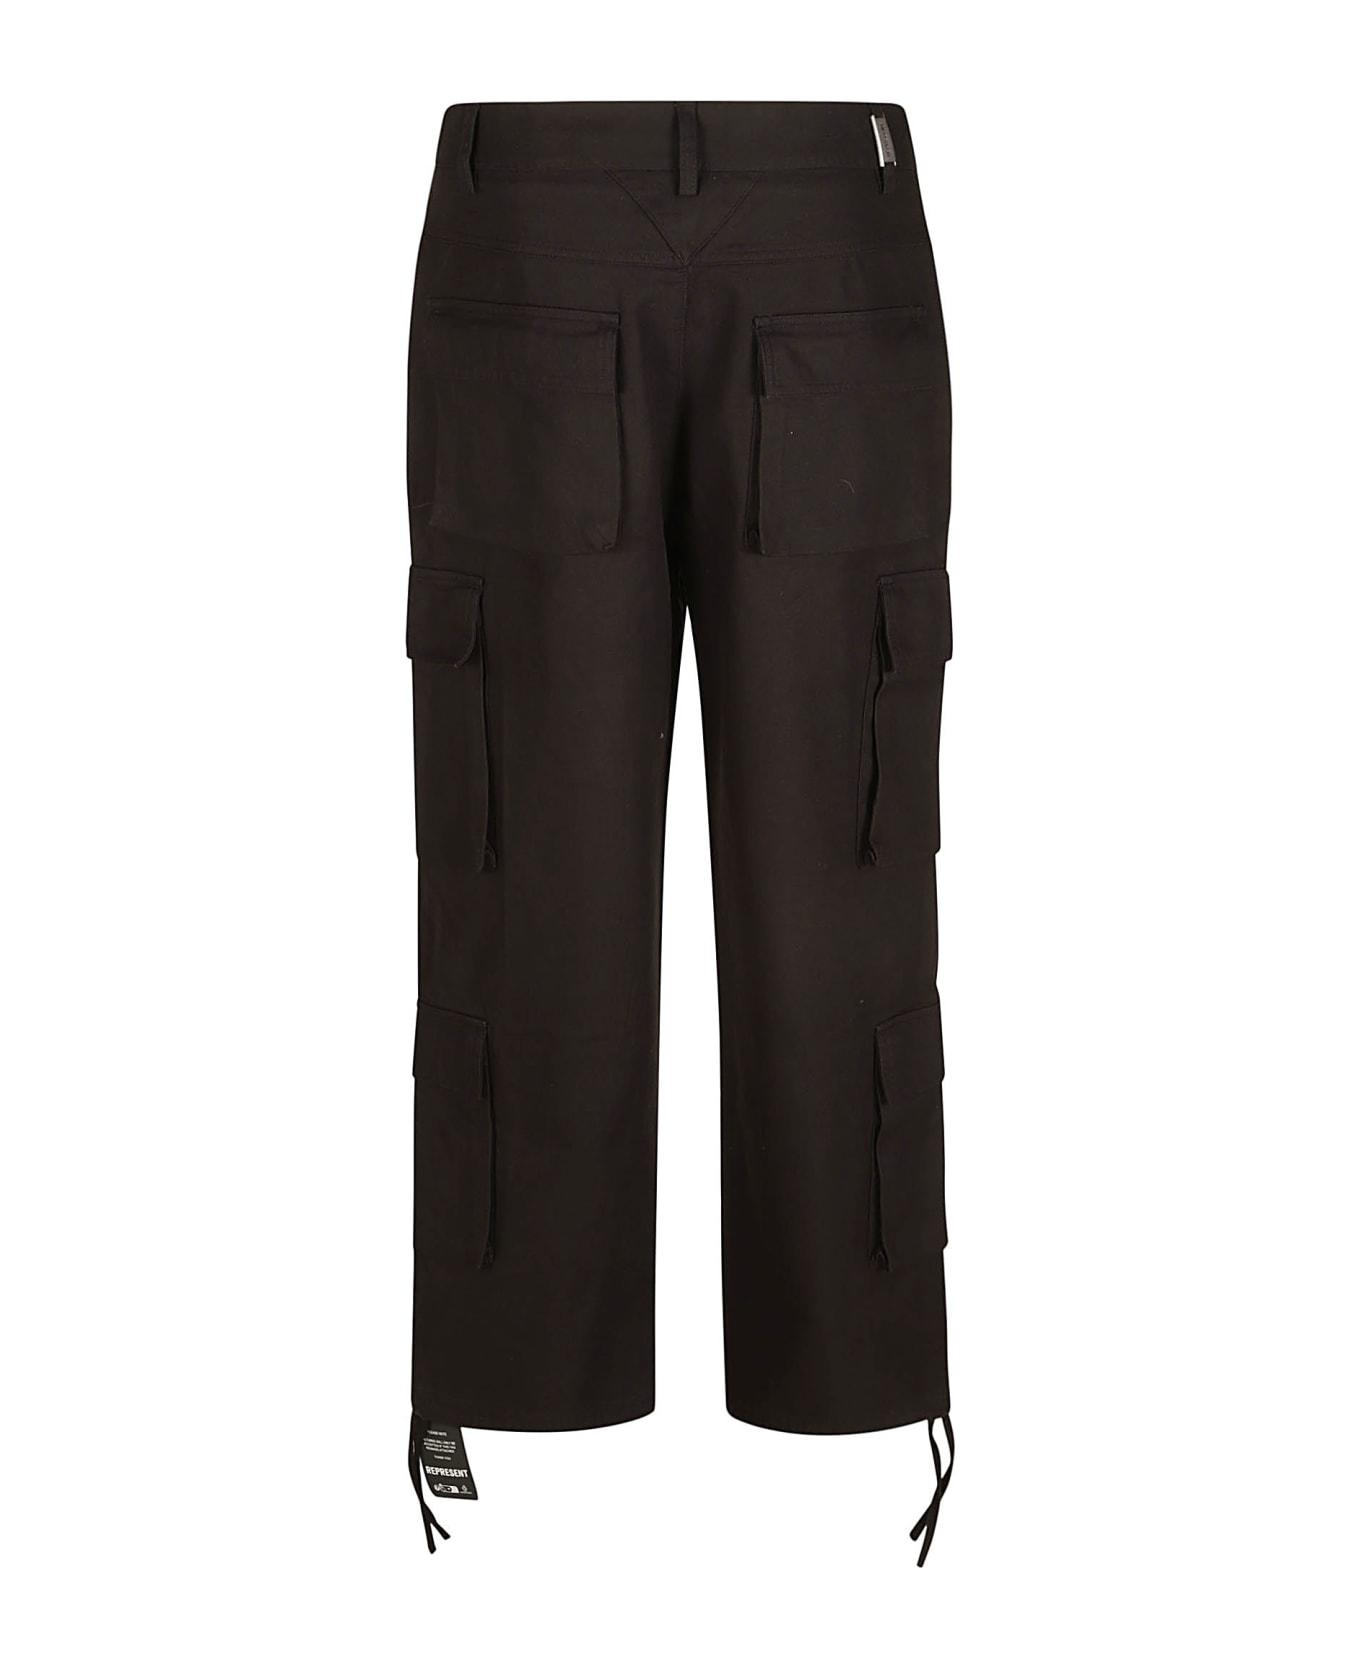 REPRESENT Baggy Cargo Trousers - Black ボトムス